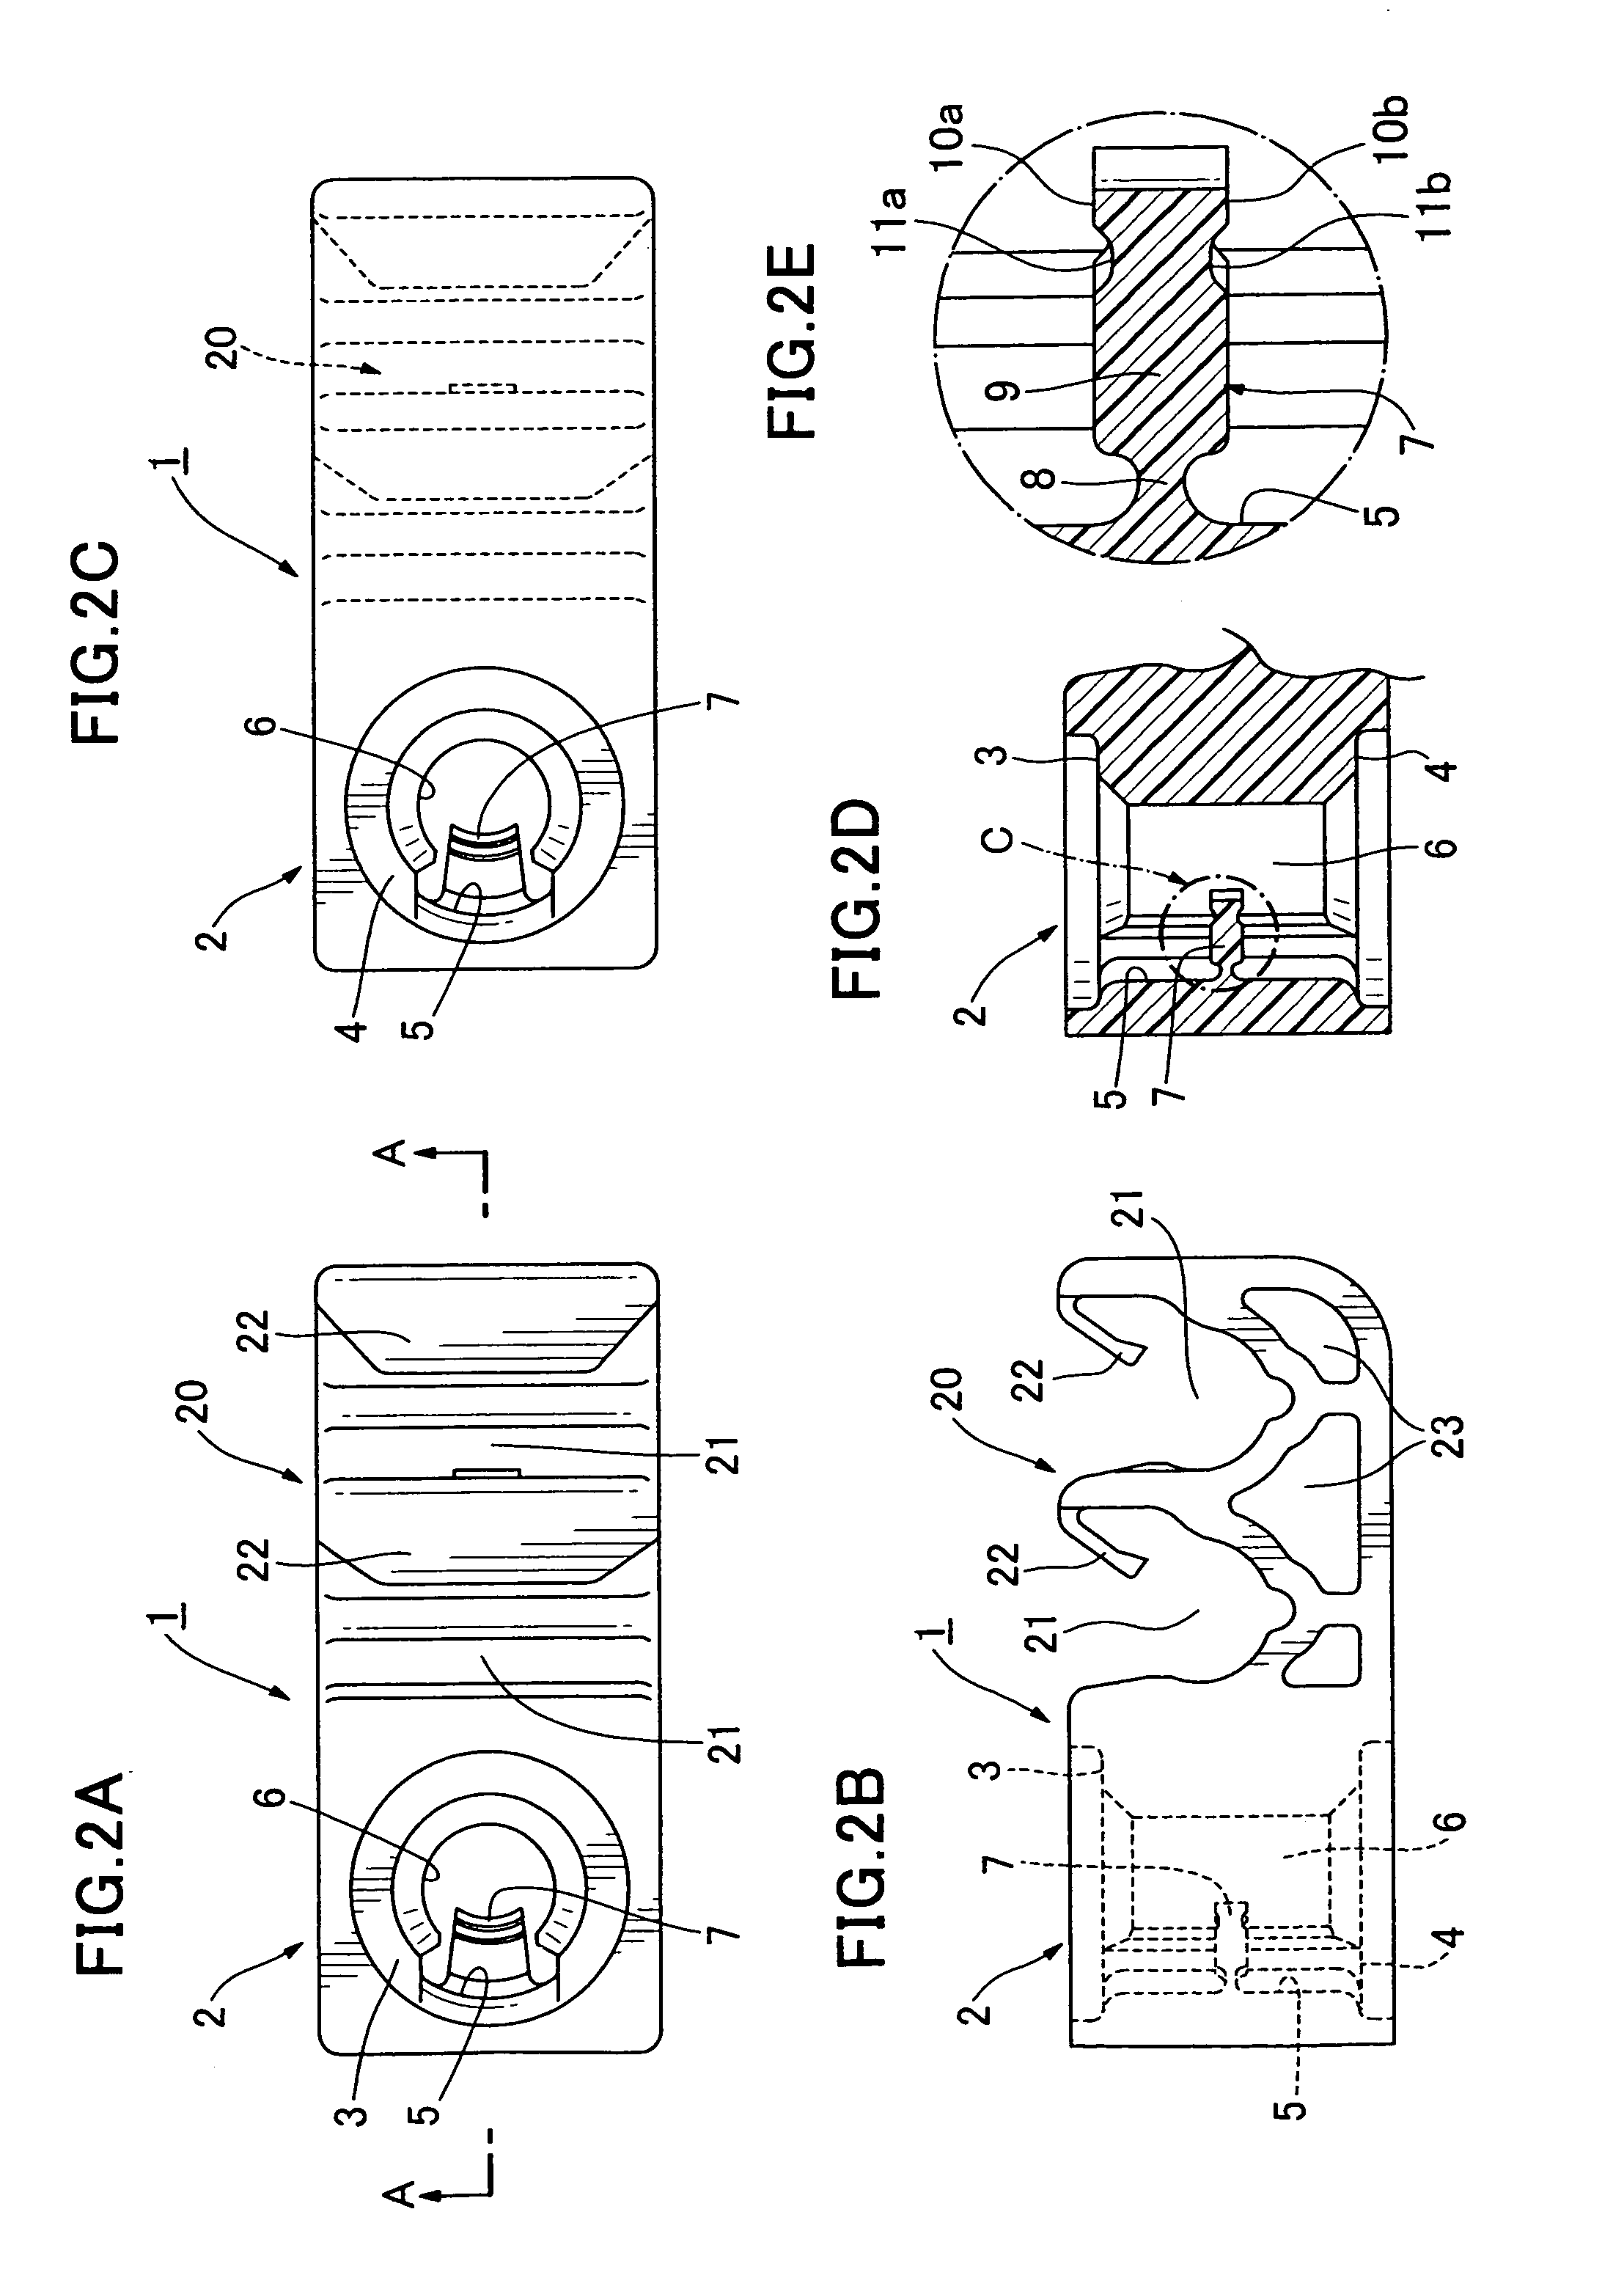 Device for mounting a component such as a pipe on a stud